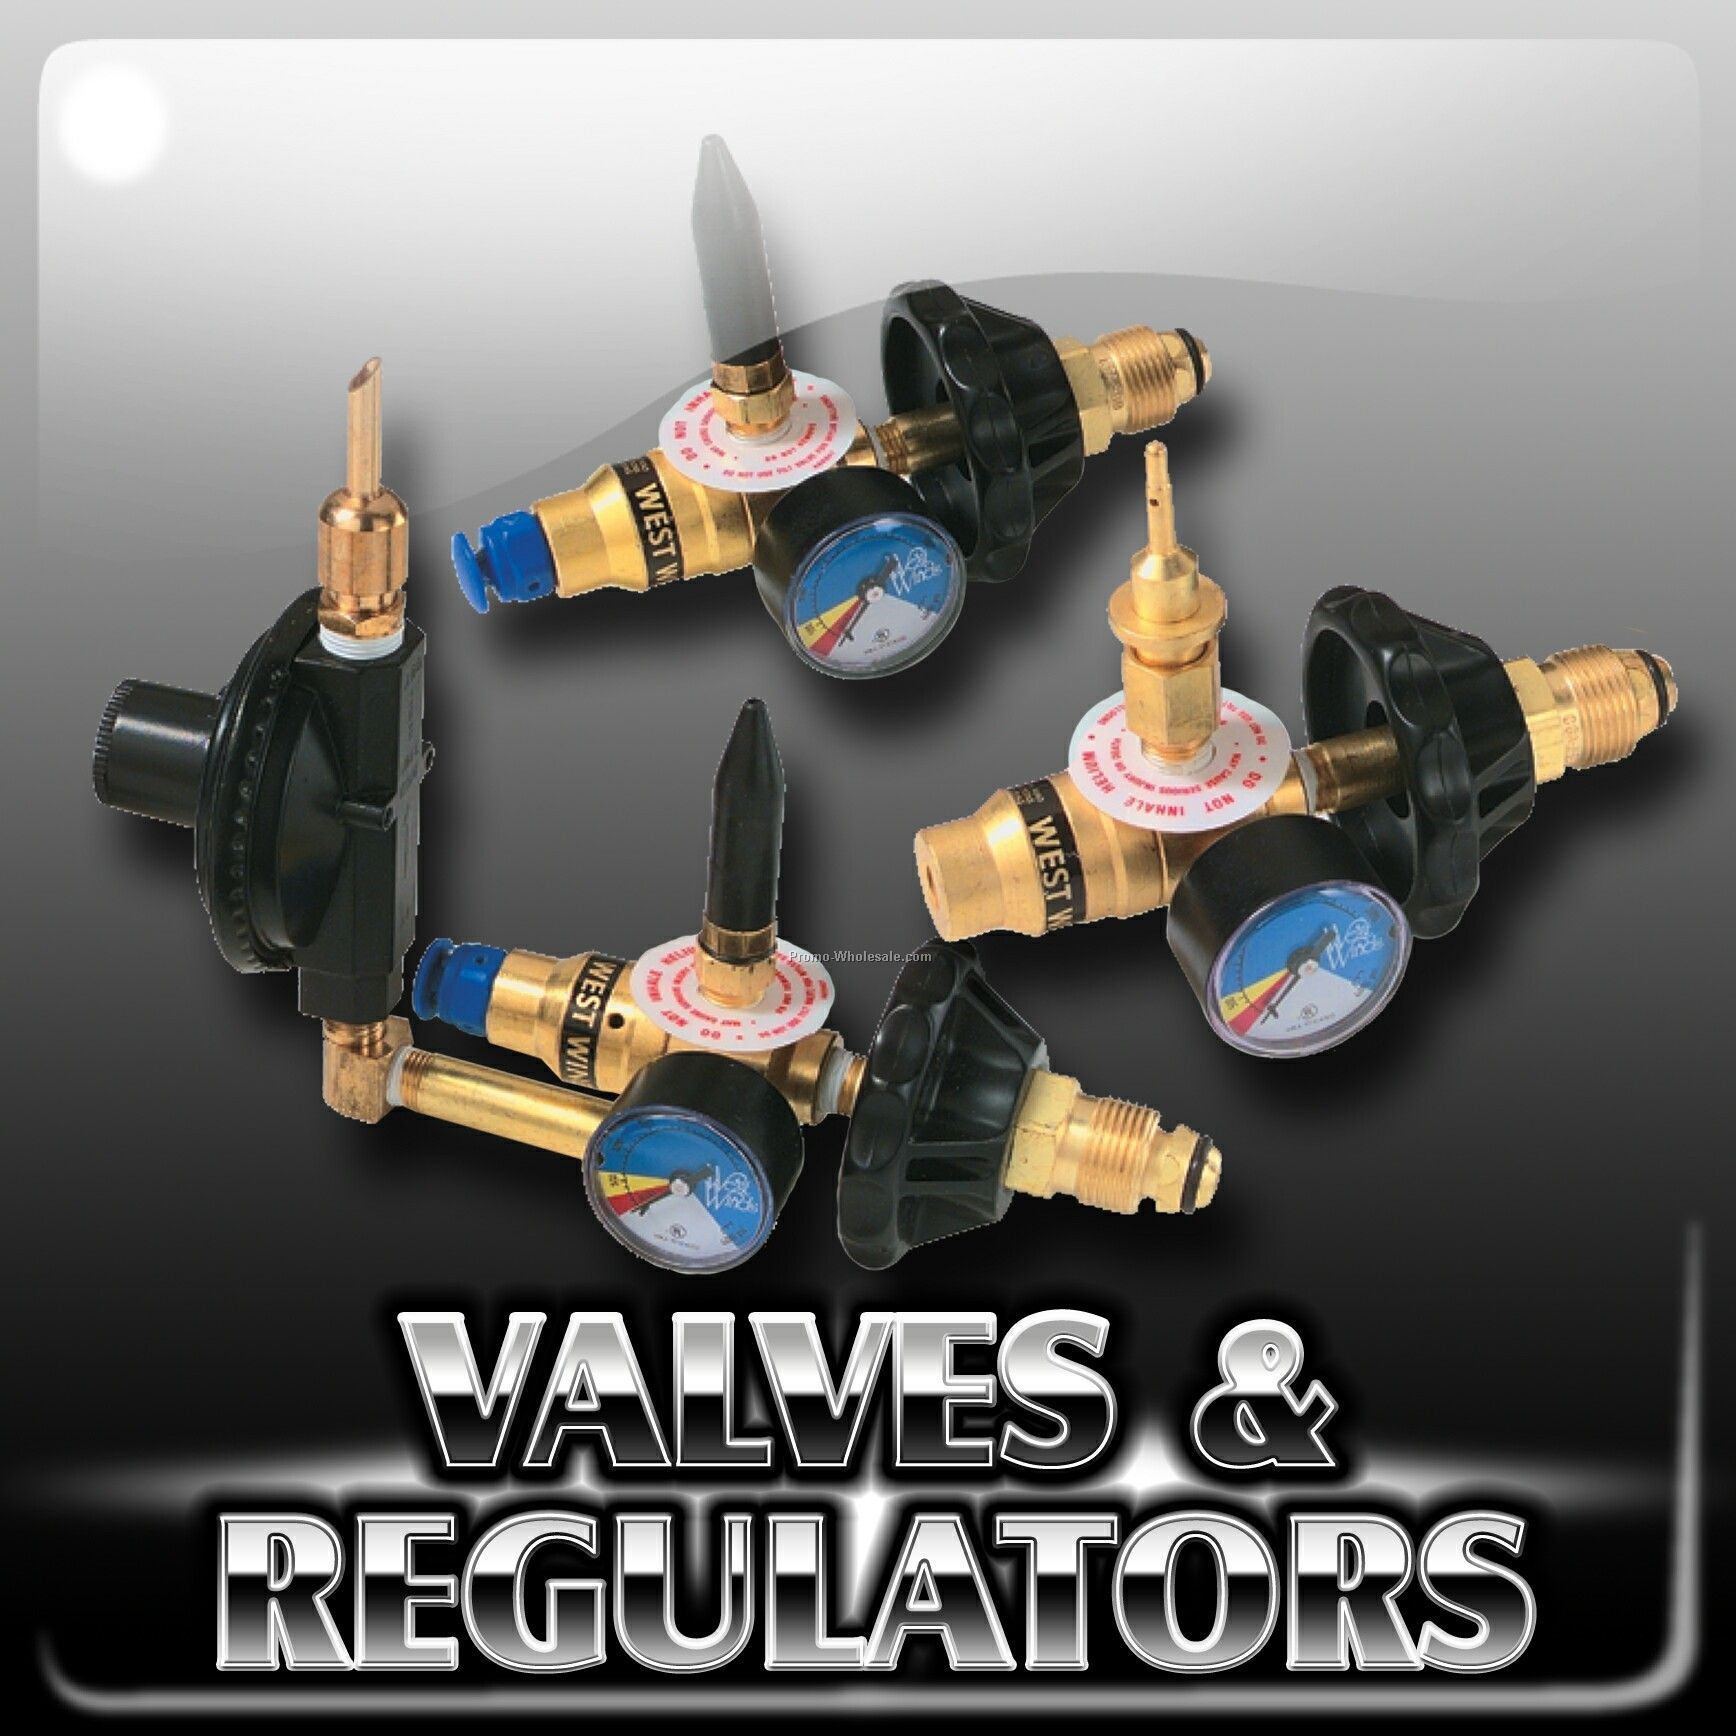 Rubber-tipped Regulator - For Latex Balloons (Gauged)